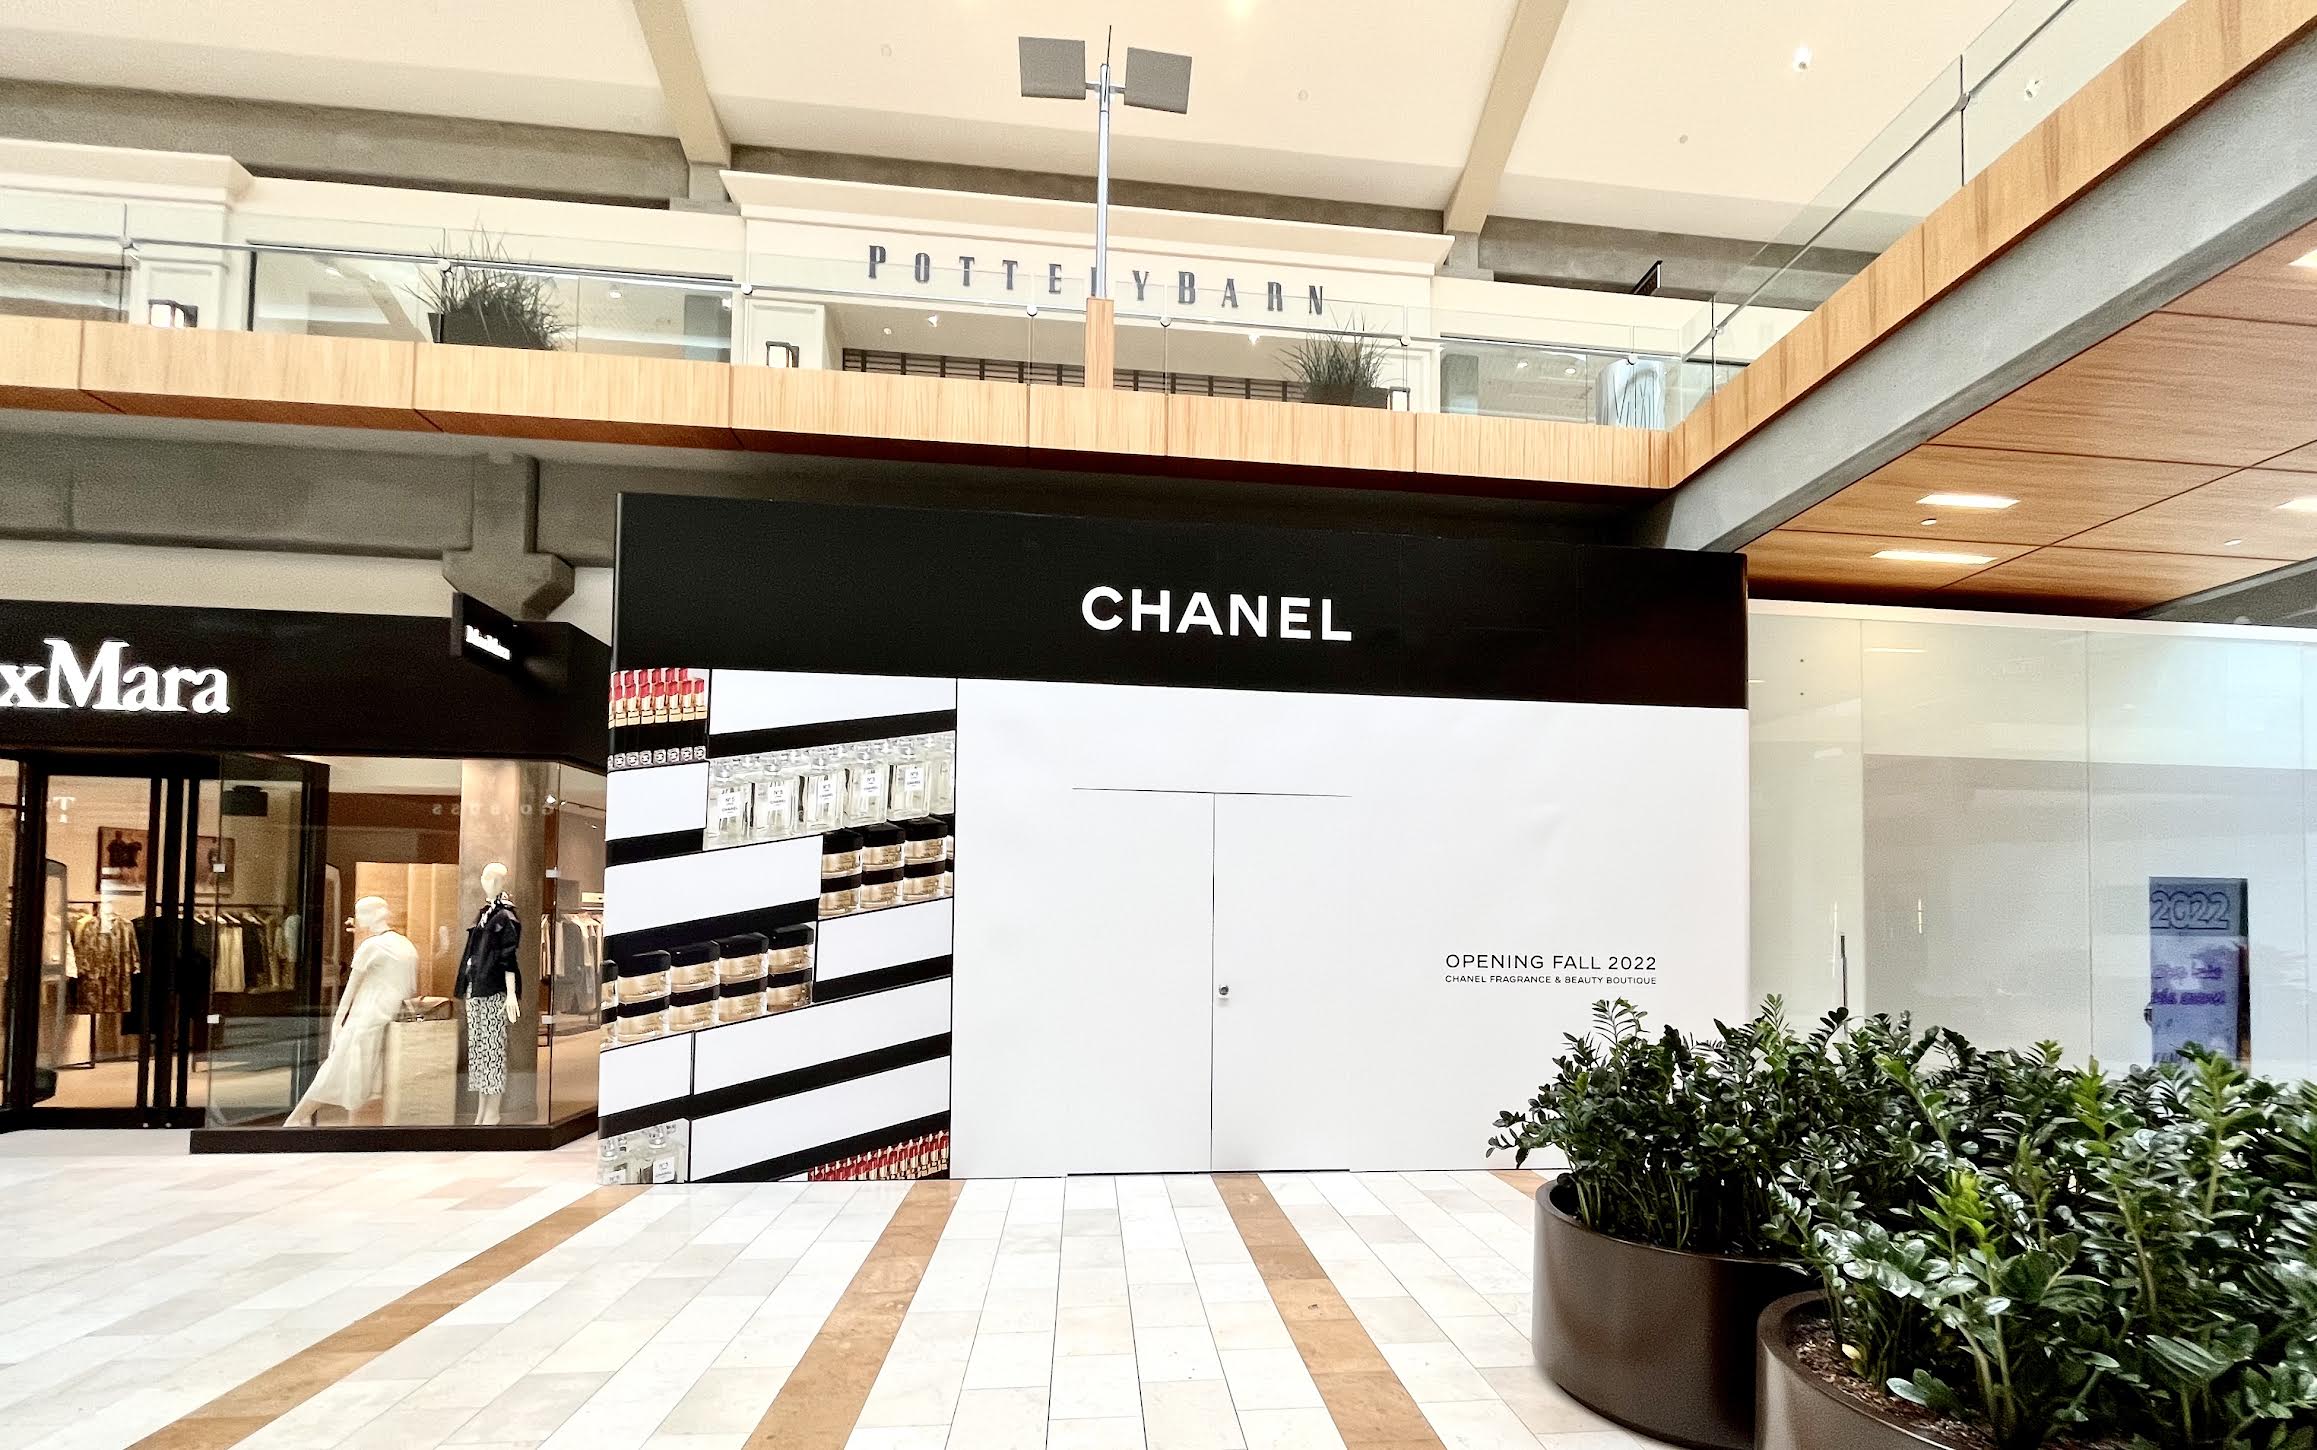 Chanel Fragrance and Beauty Opens at The Mall at Green Hills